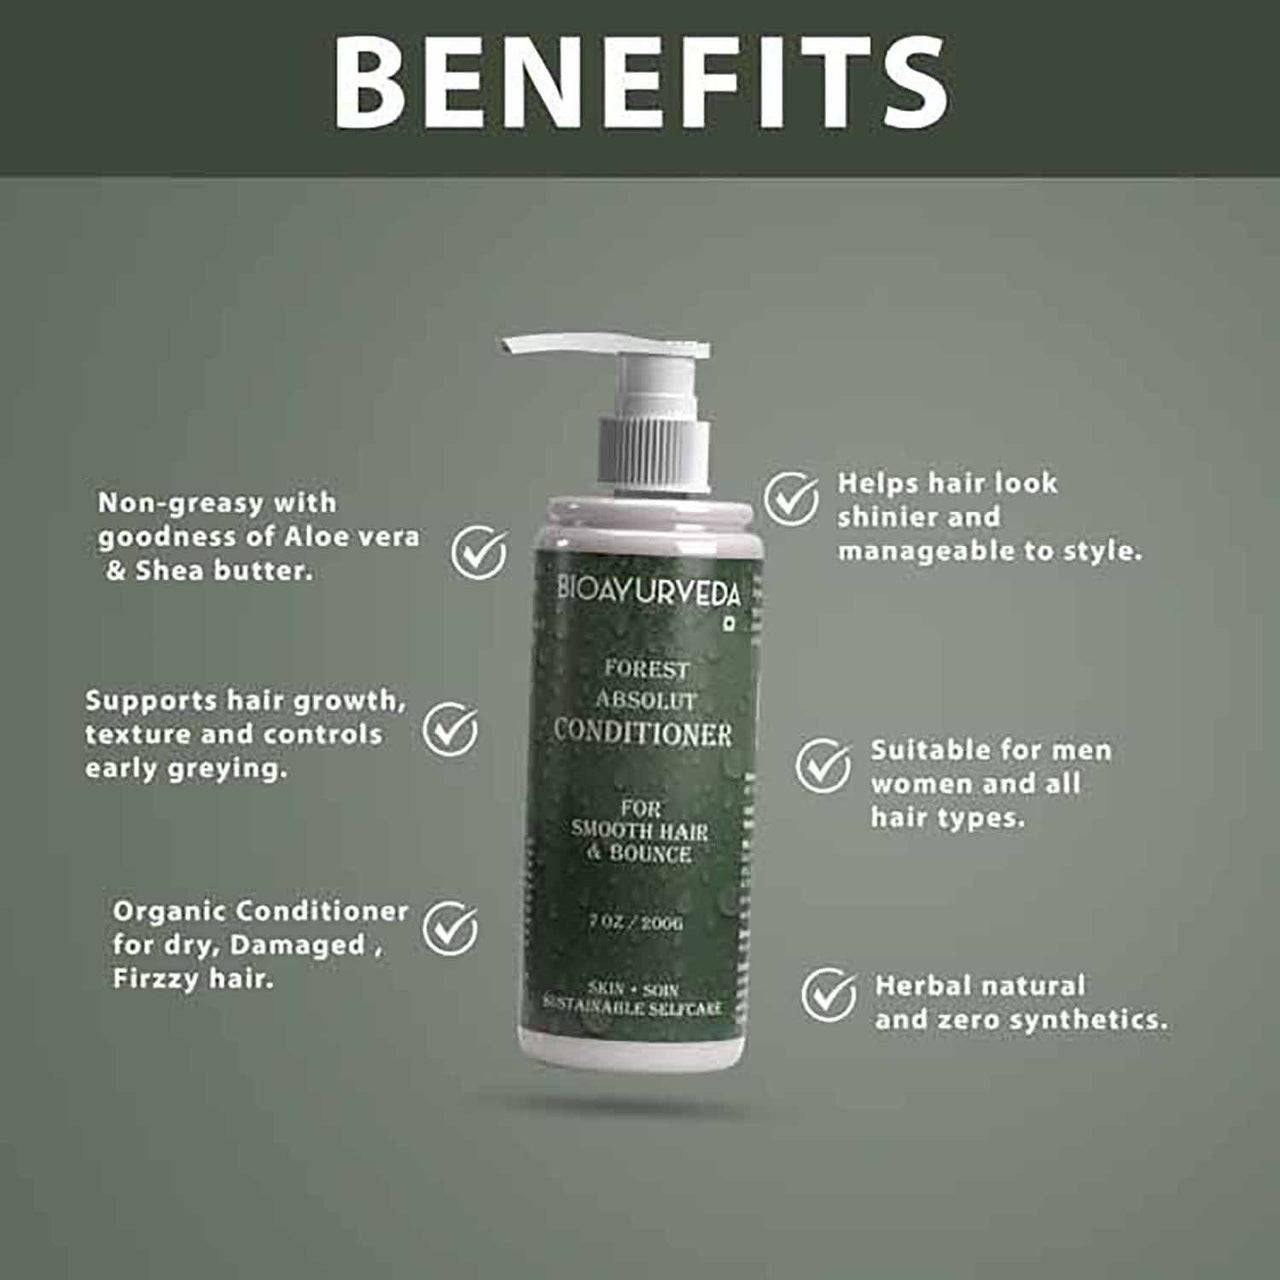 Forest Absolut Conditioner Benefits